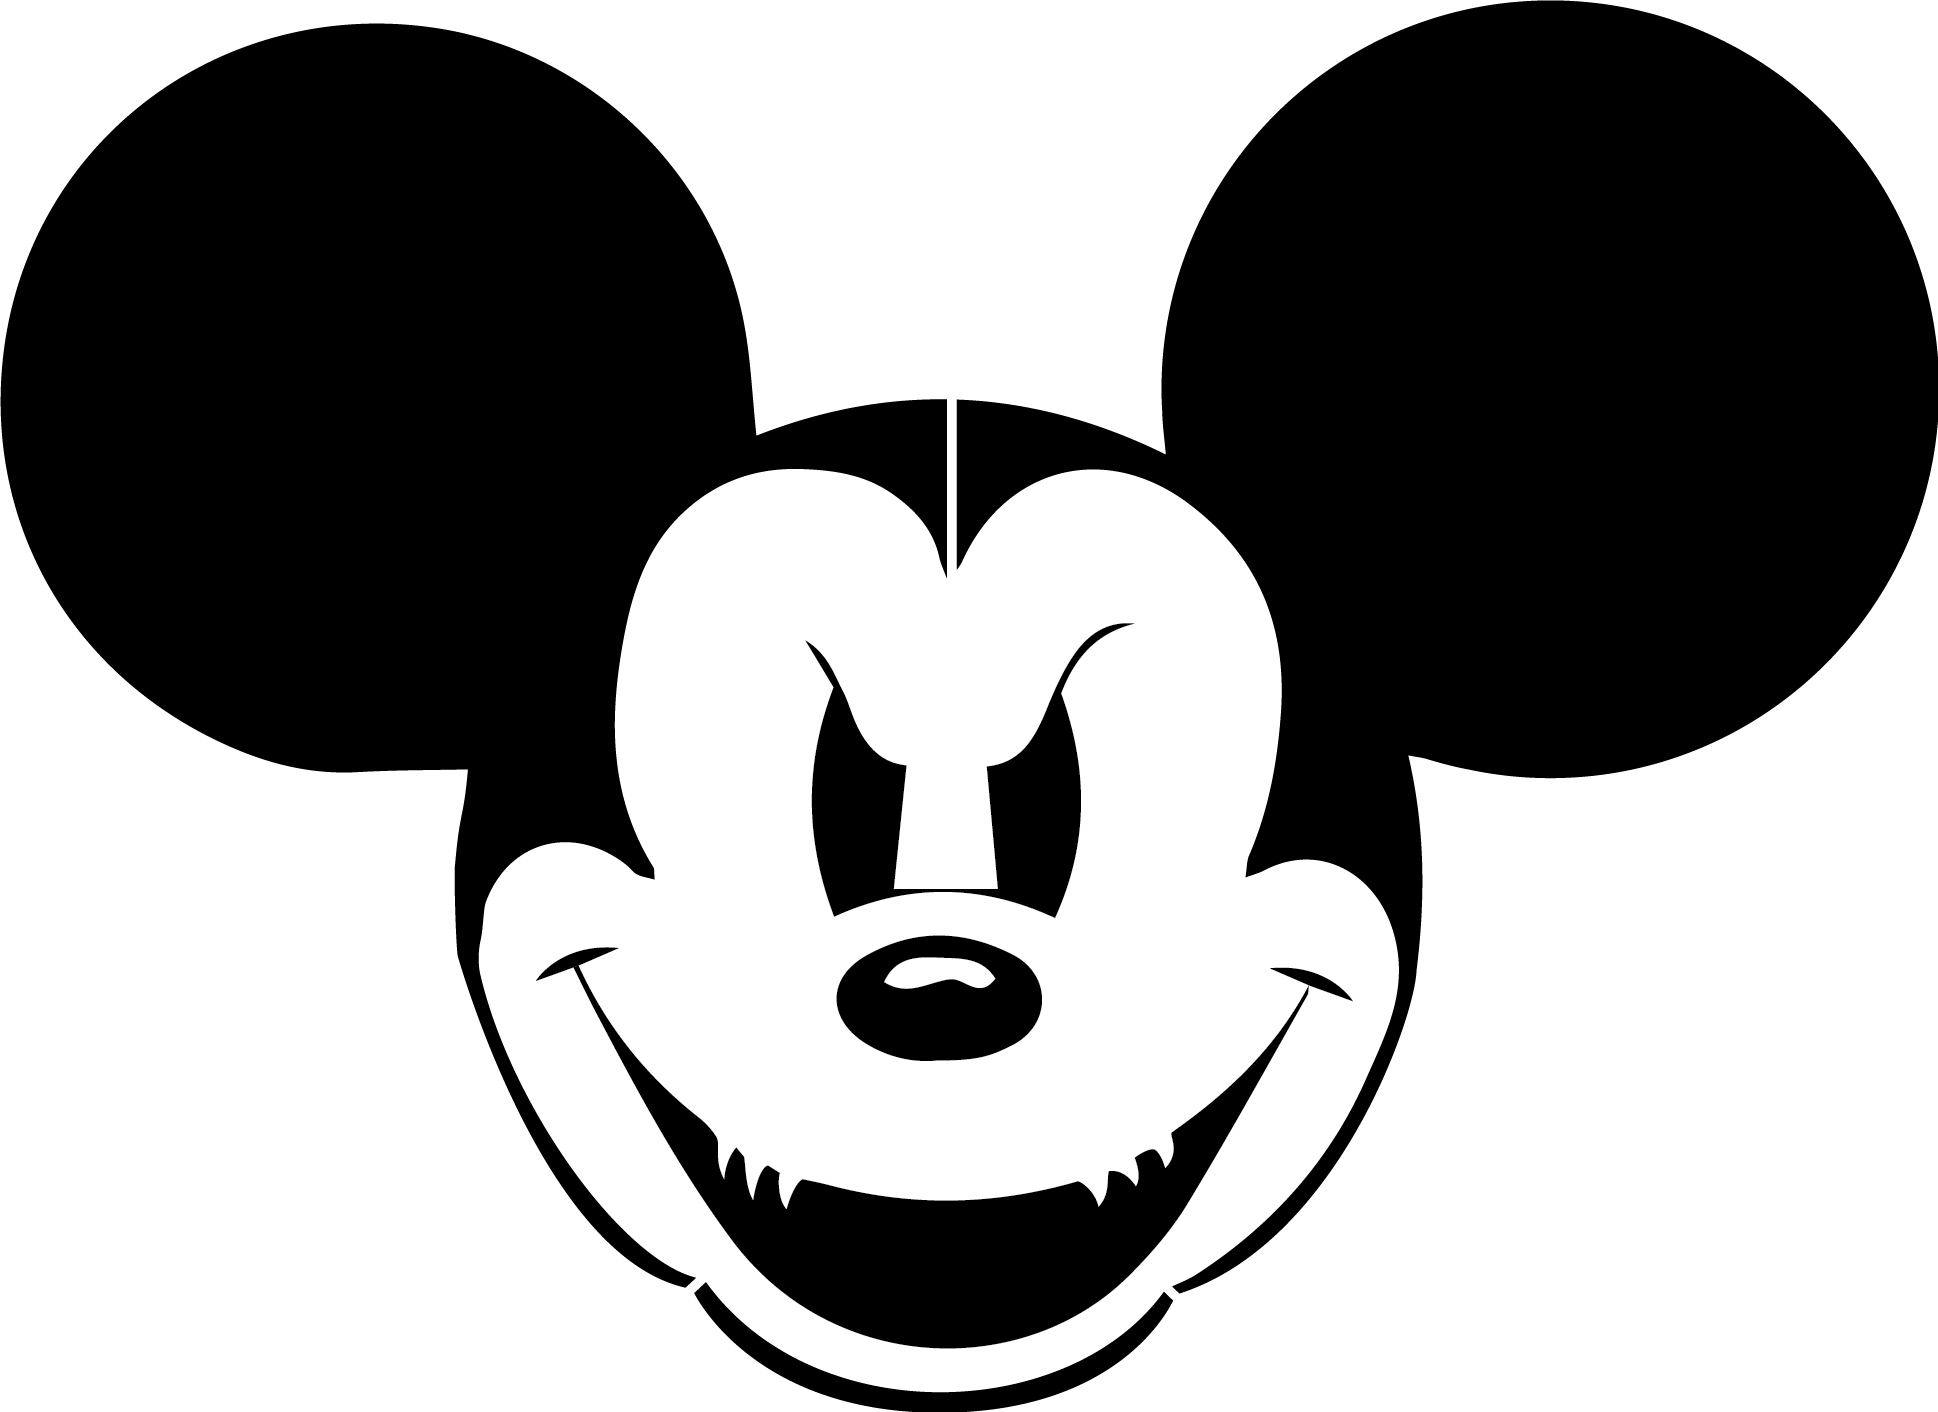 Free Mickey Mouse Free Stencils, Download Free Clip Art, Free Clip Art